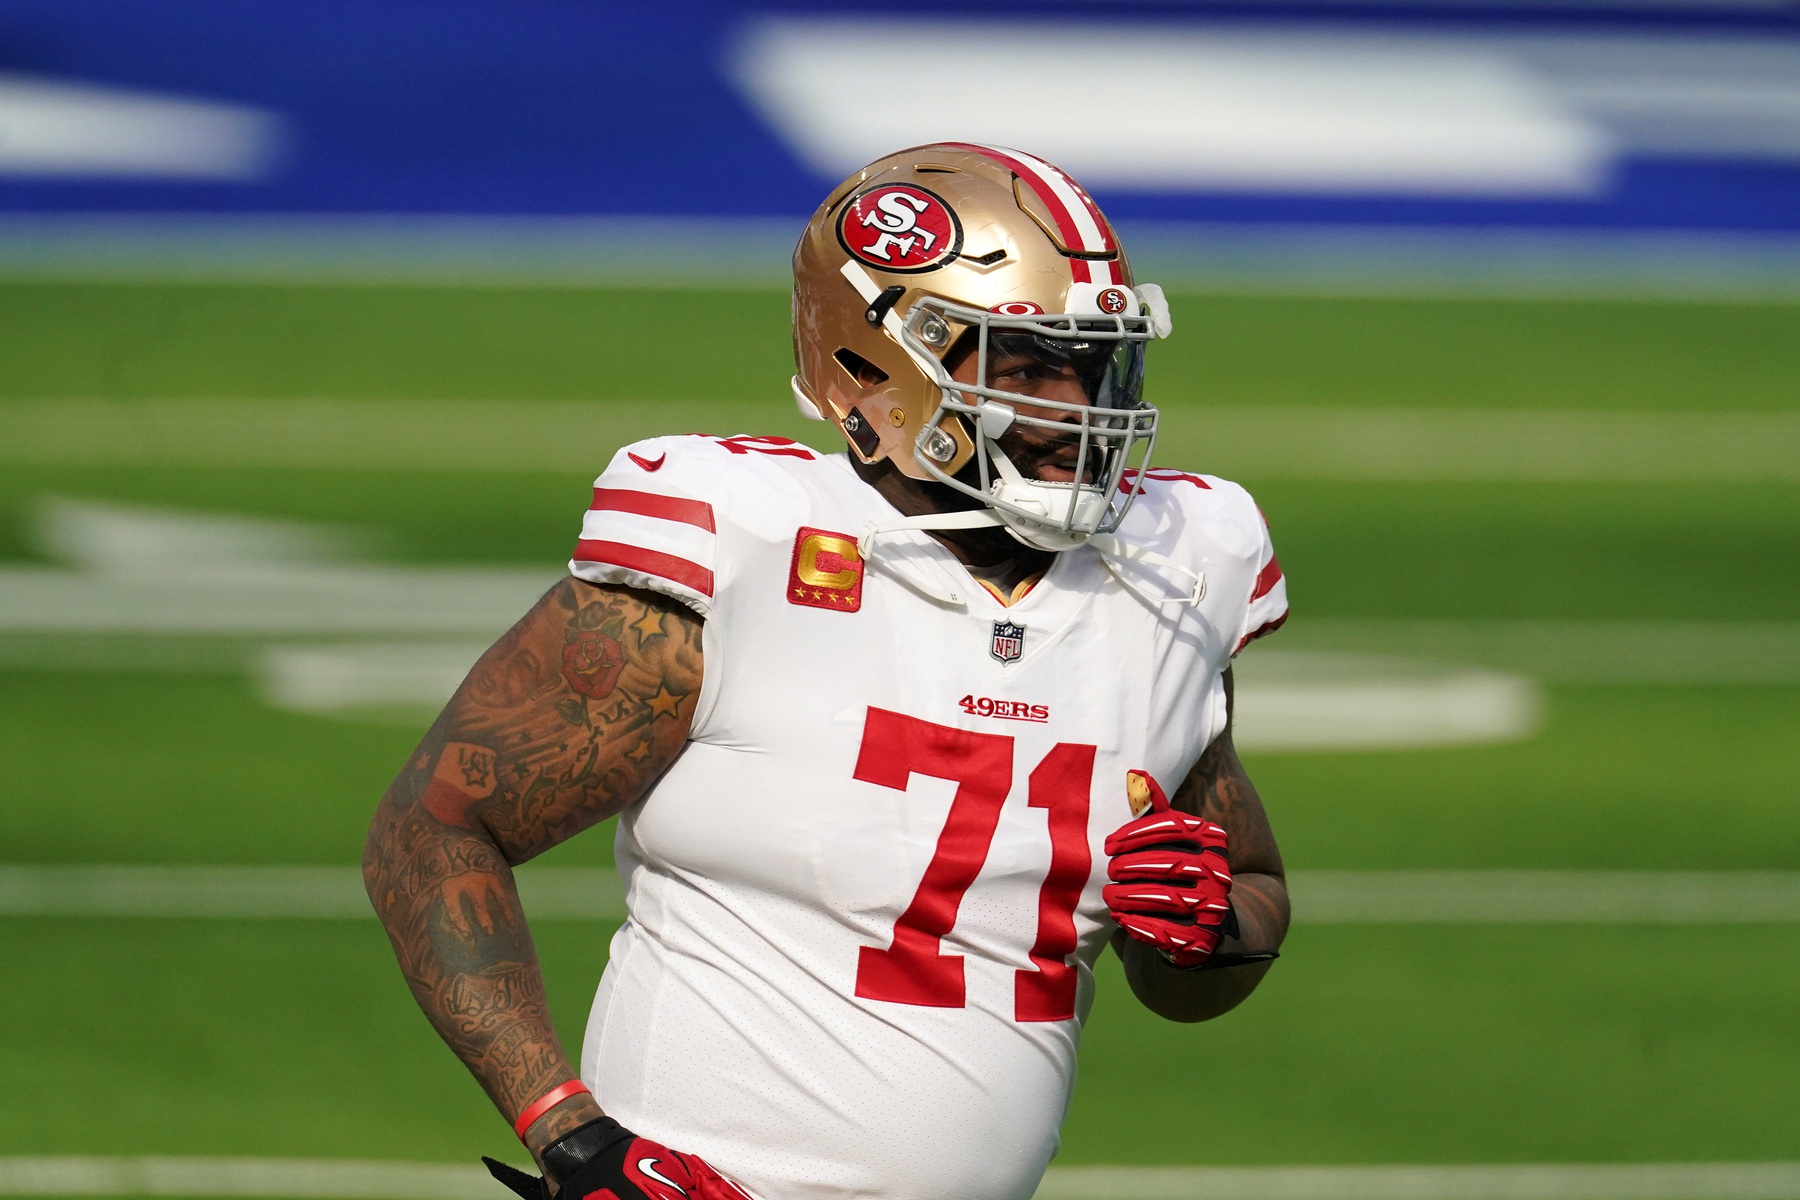 Week 4 NFL OL Rankings: Jets and Bills face injury questions, 49ers lose  Trent Williams, and Daniel Faalele makes his debut